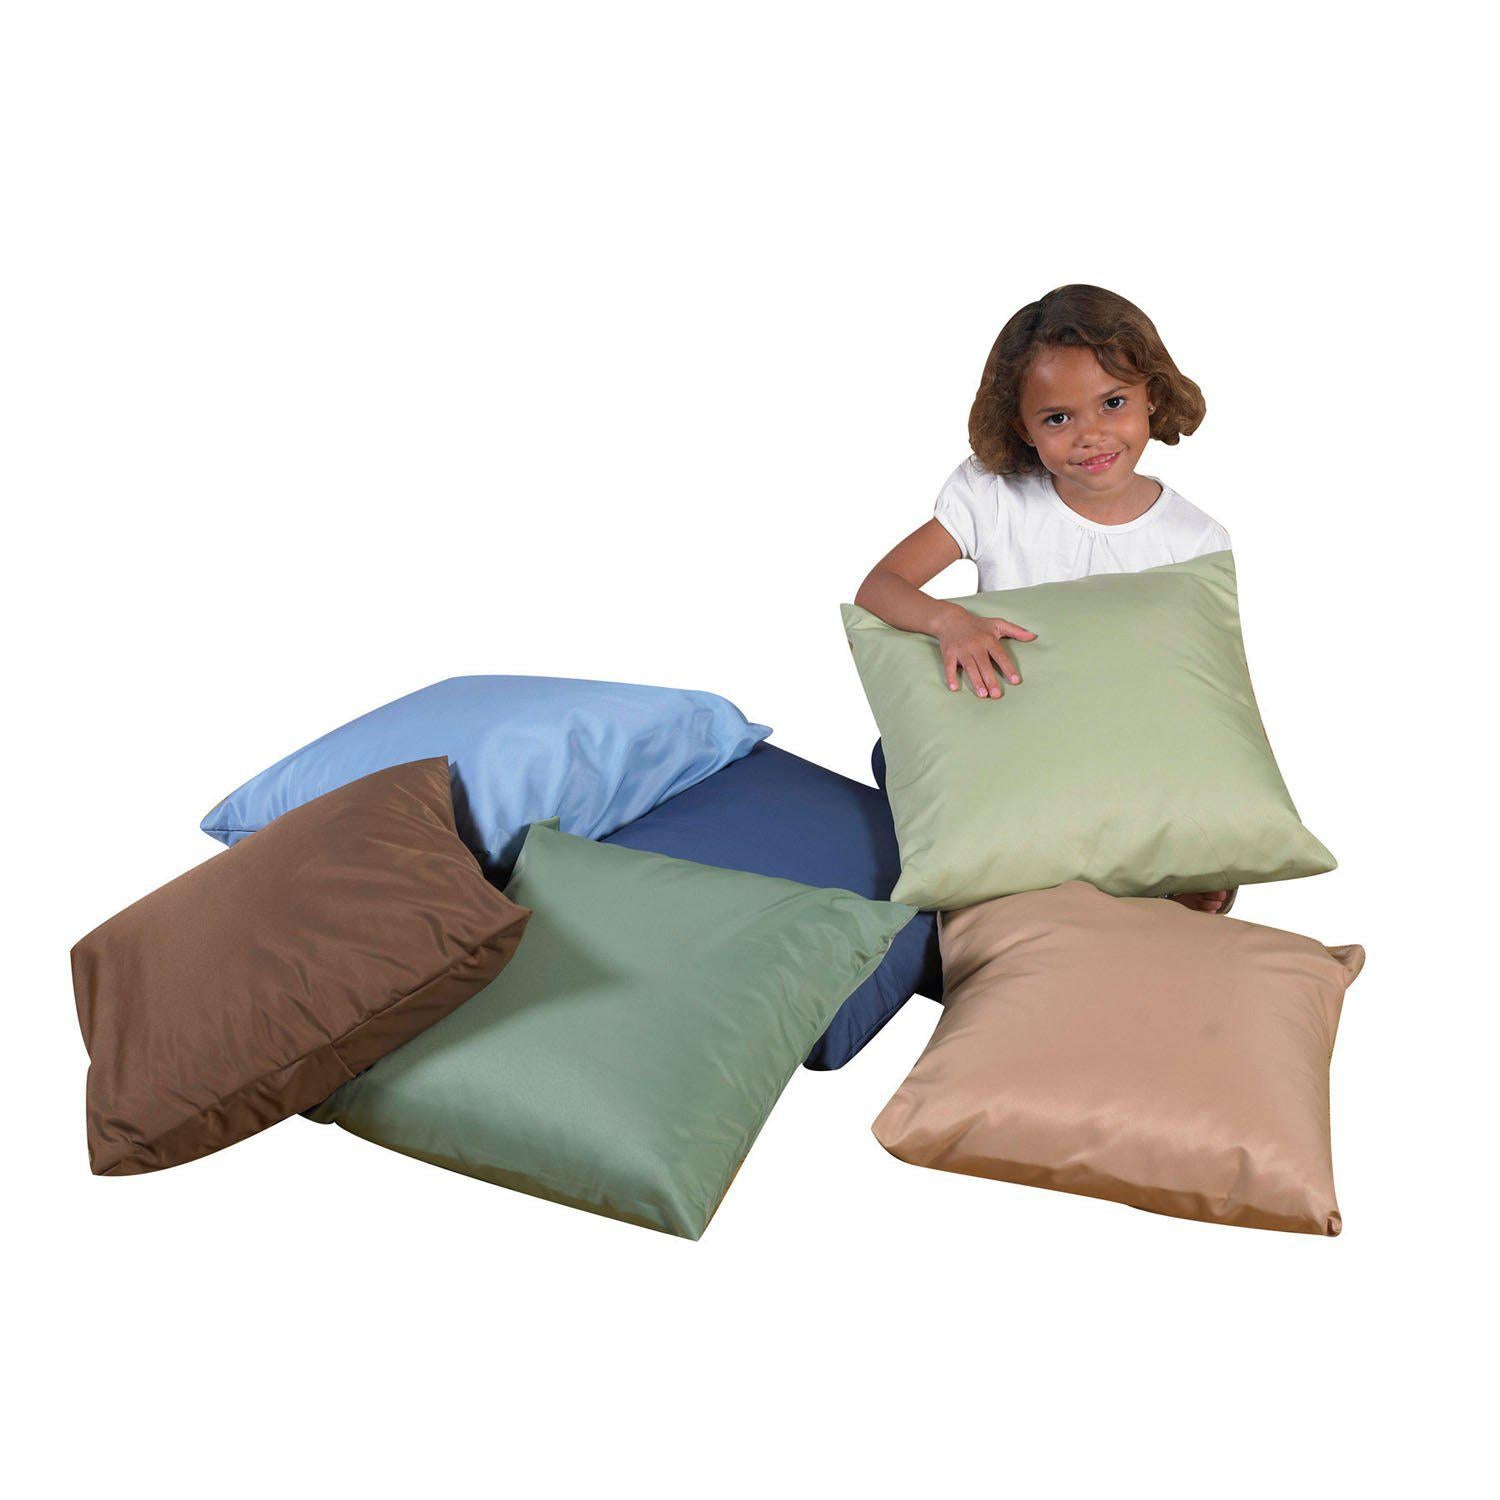 17" Cozy Pillows - Woodland Colors - Set of 6